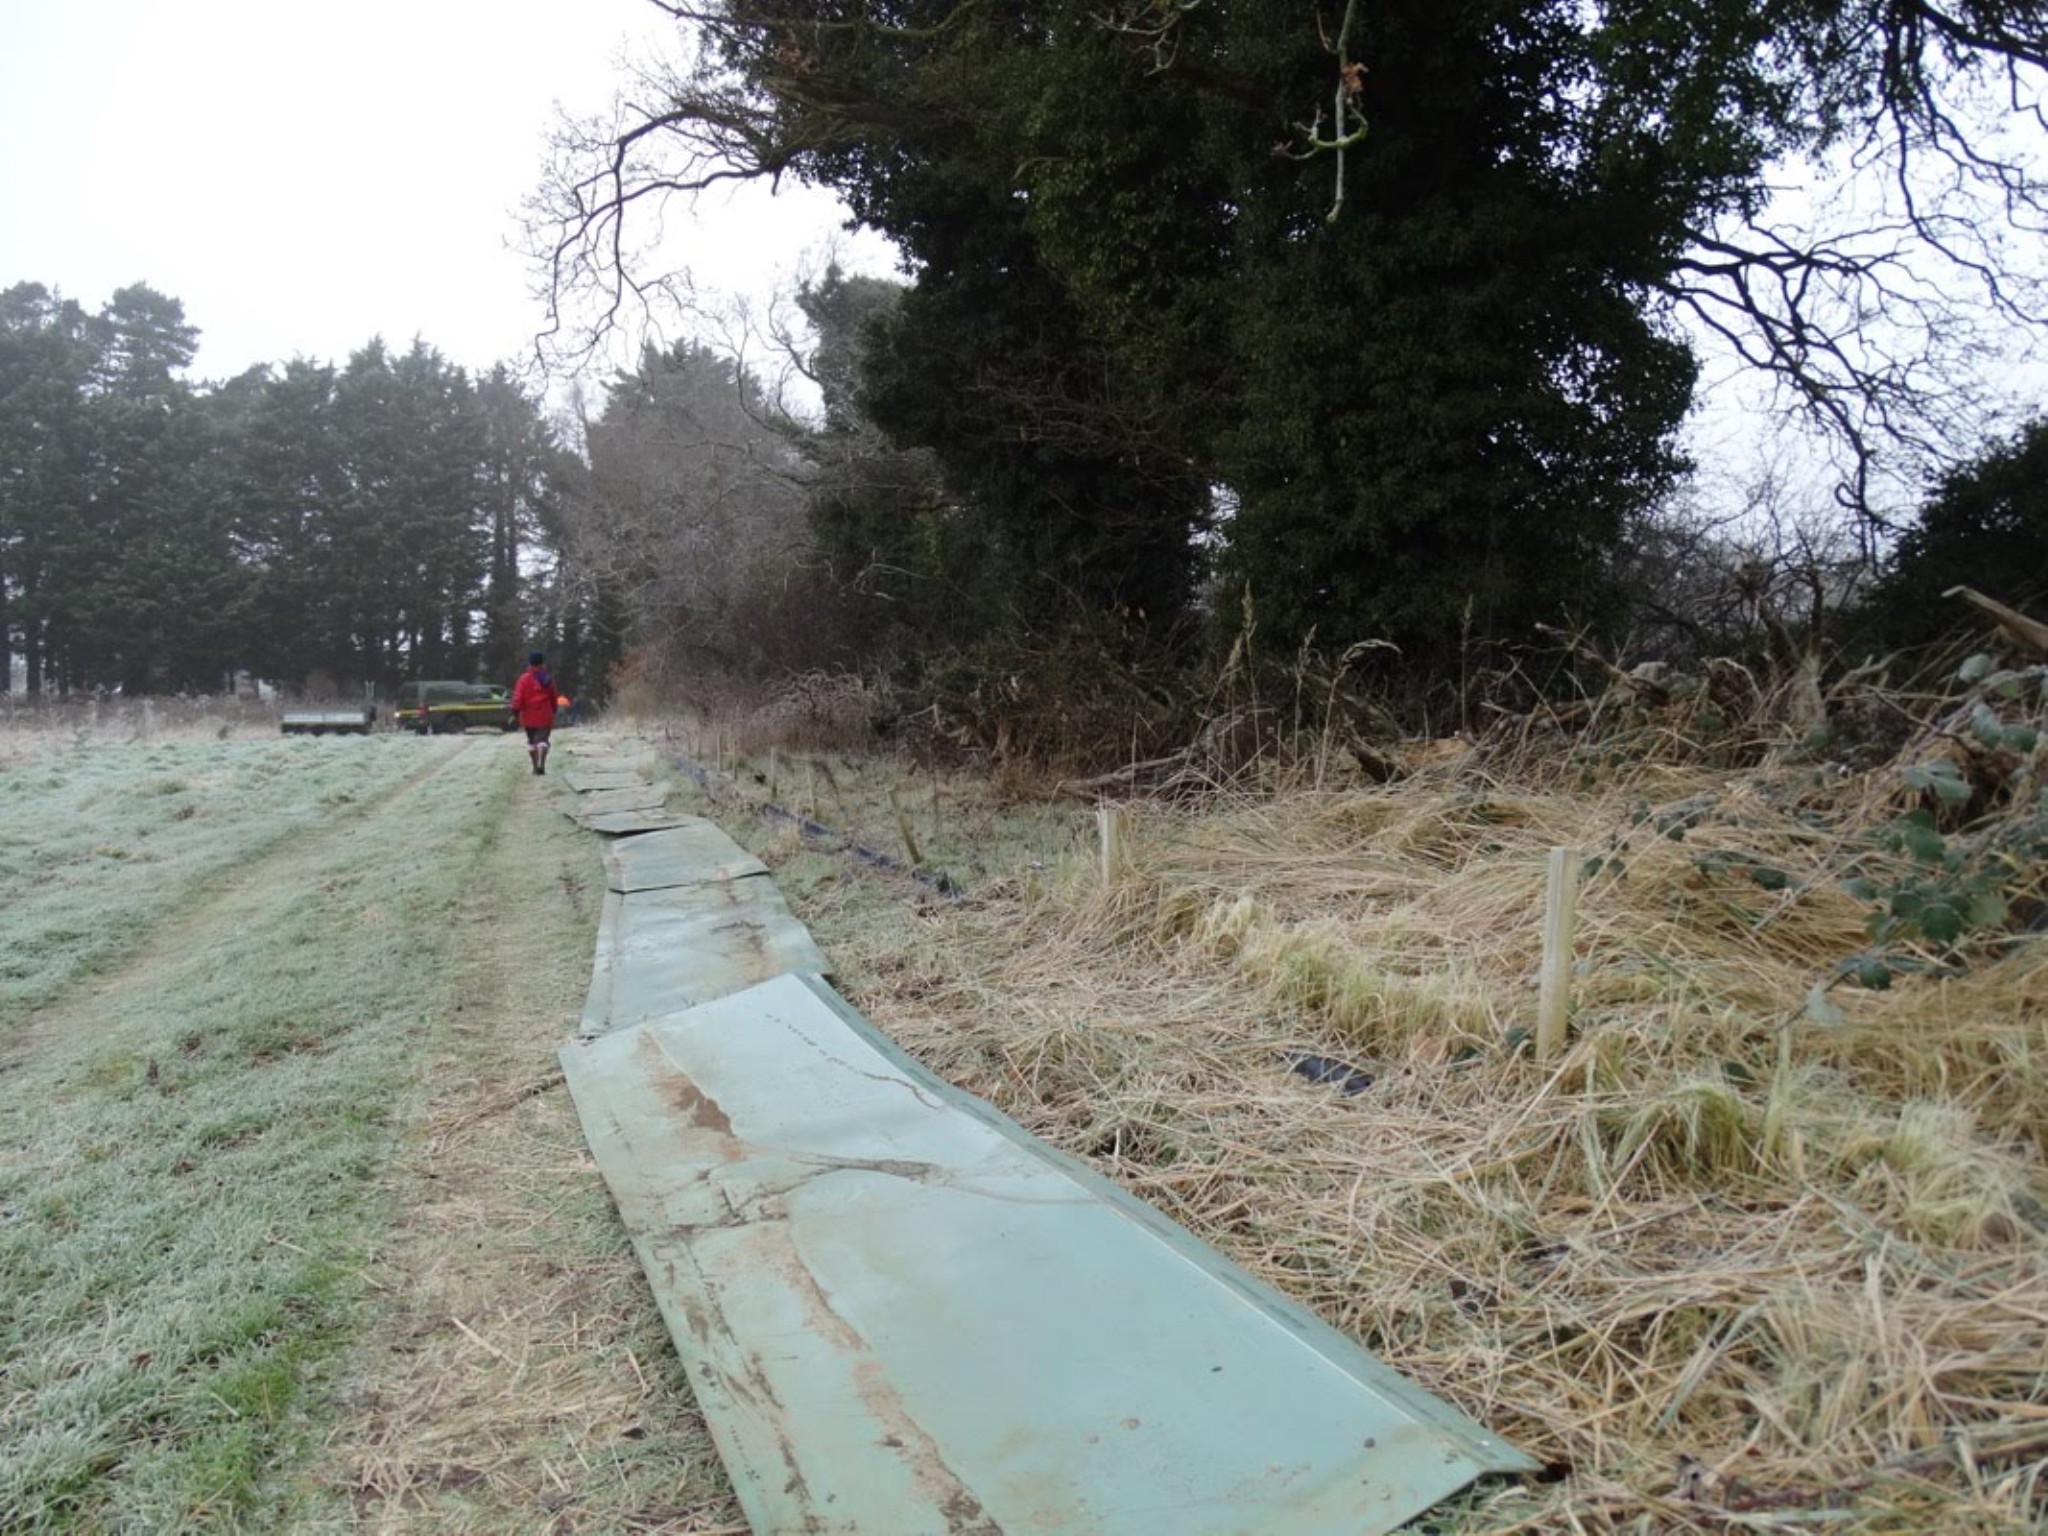 A photo from the FoTF Conservation Event - January 2018 - Erecting the Toad Fence at Cranwich : Sections of the fence lay down on the ground